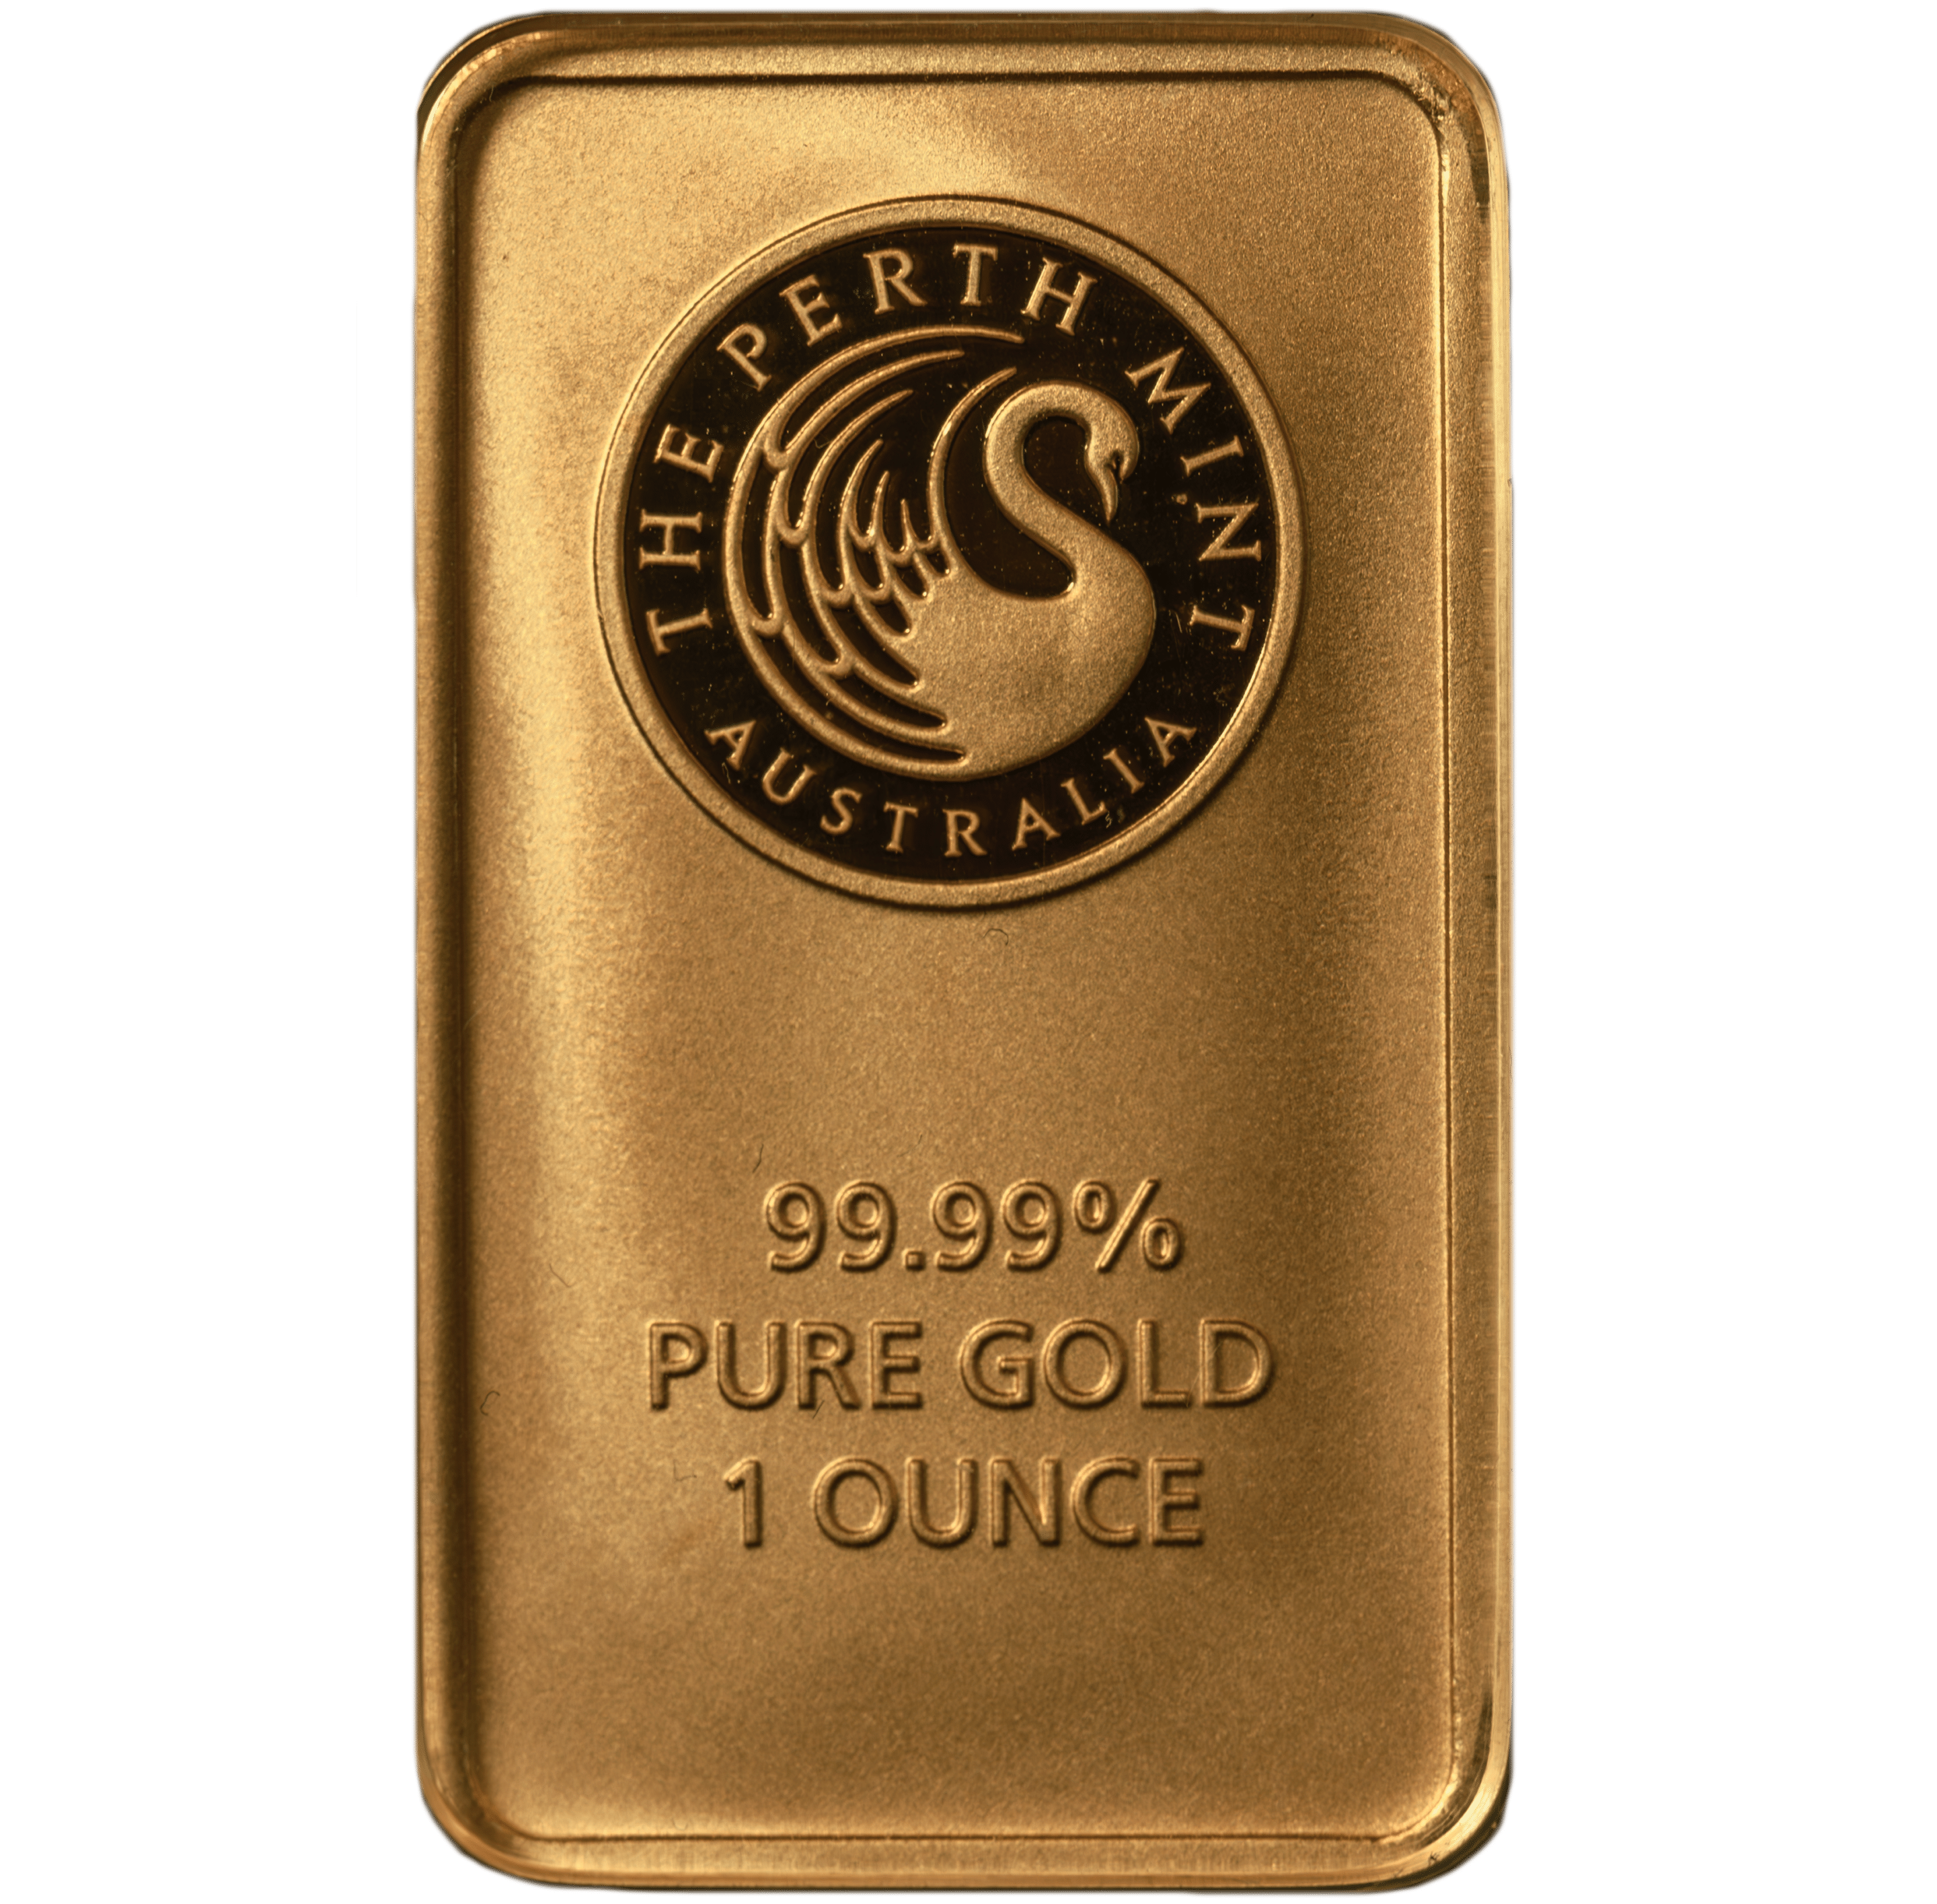 Buy 1 ounce Gold bars from Accurate Precious Metals